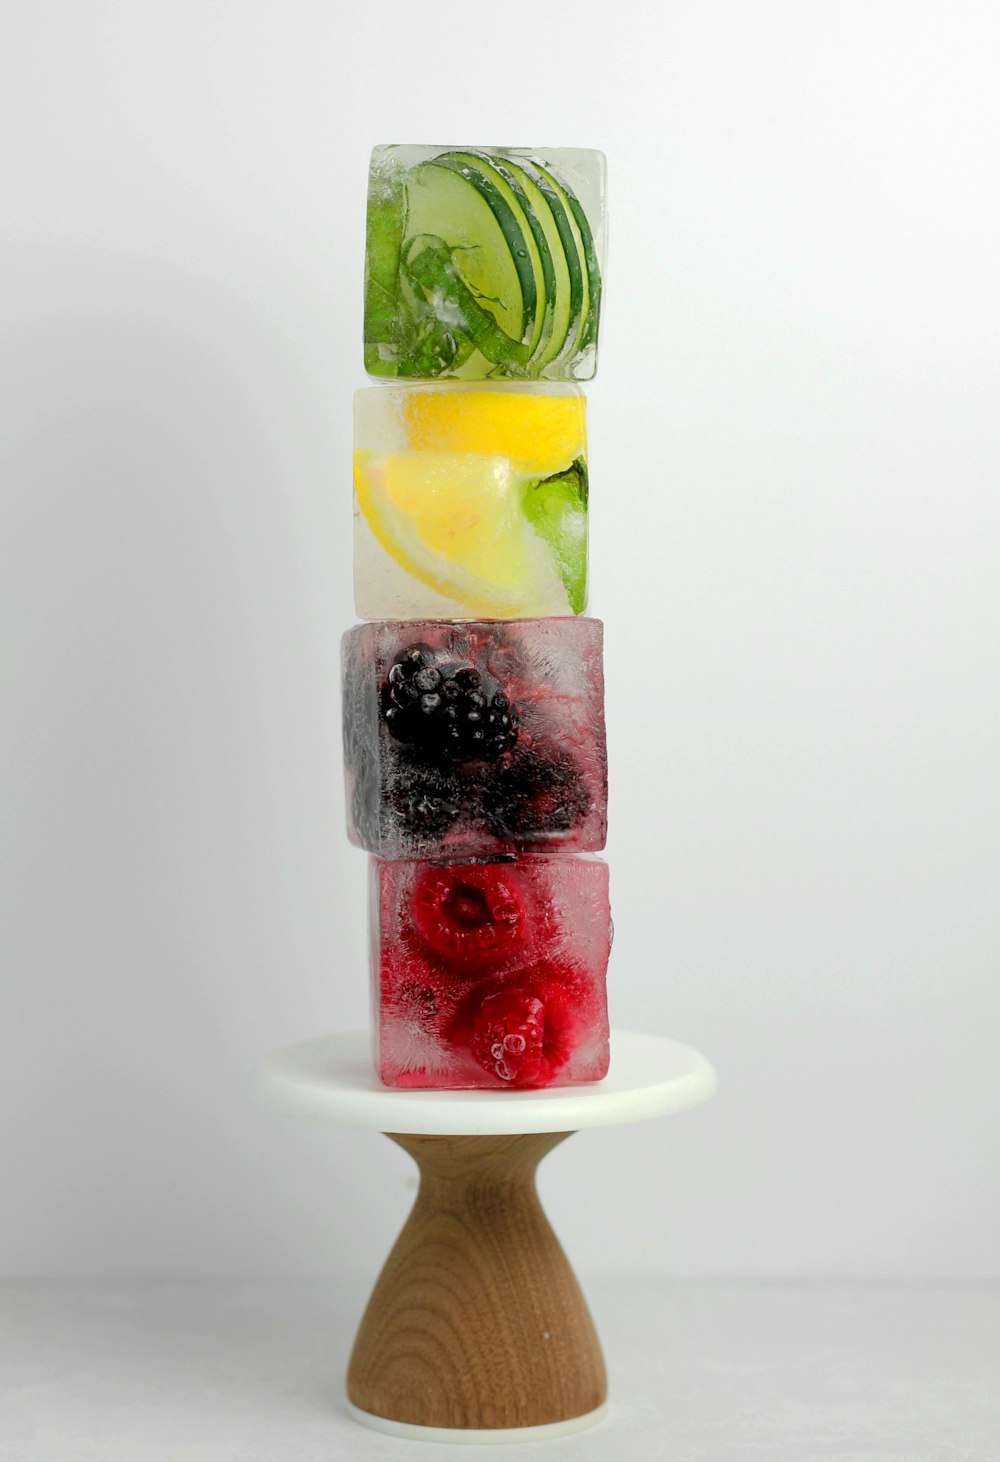 stacked ice cubes of different flavors